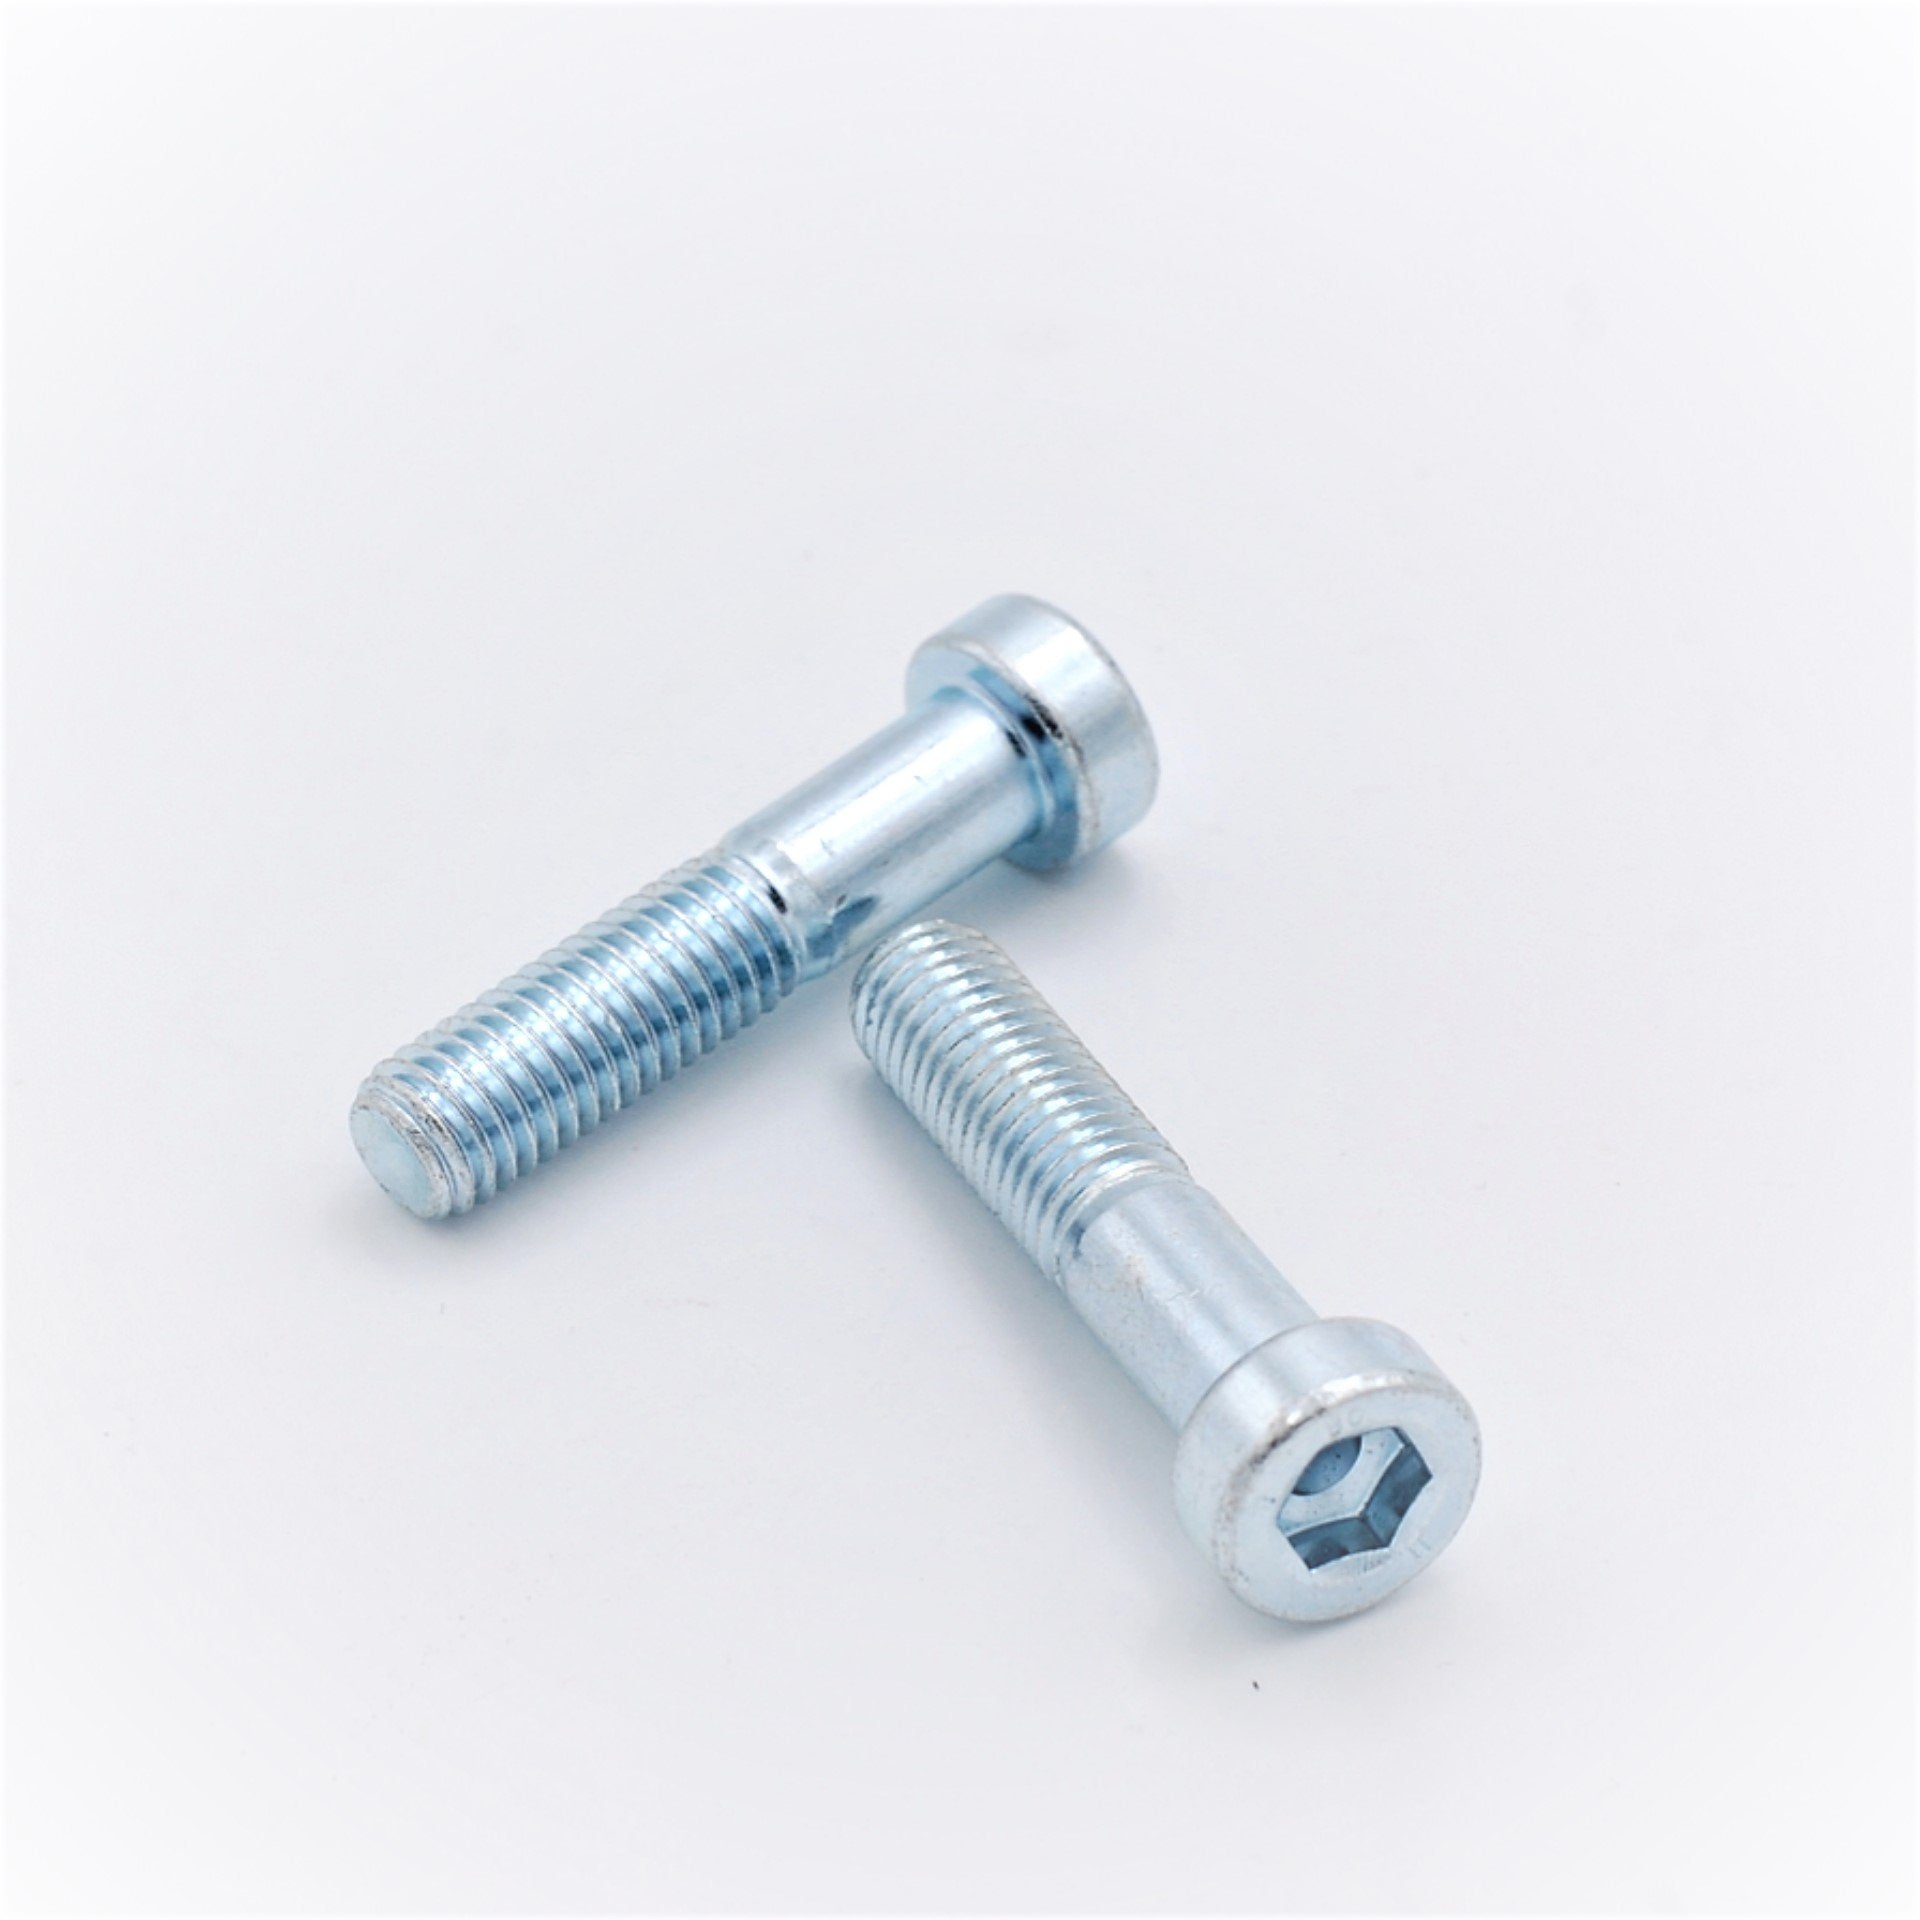 M10 Low Profile Screws for the KTM Top Triple Clamp